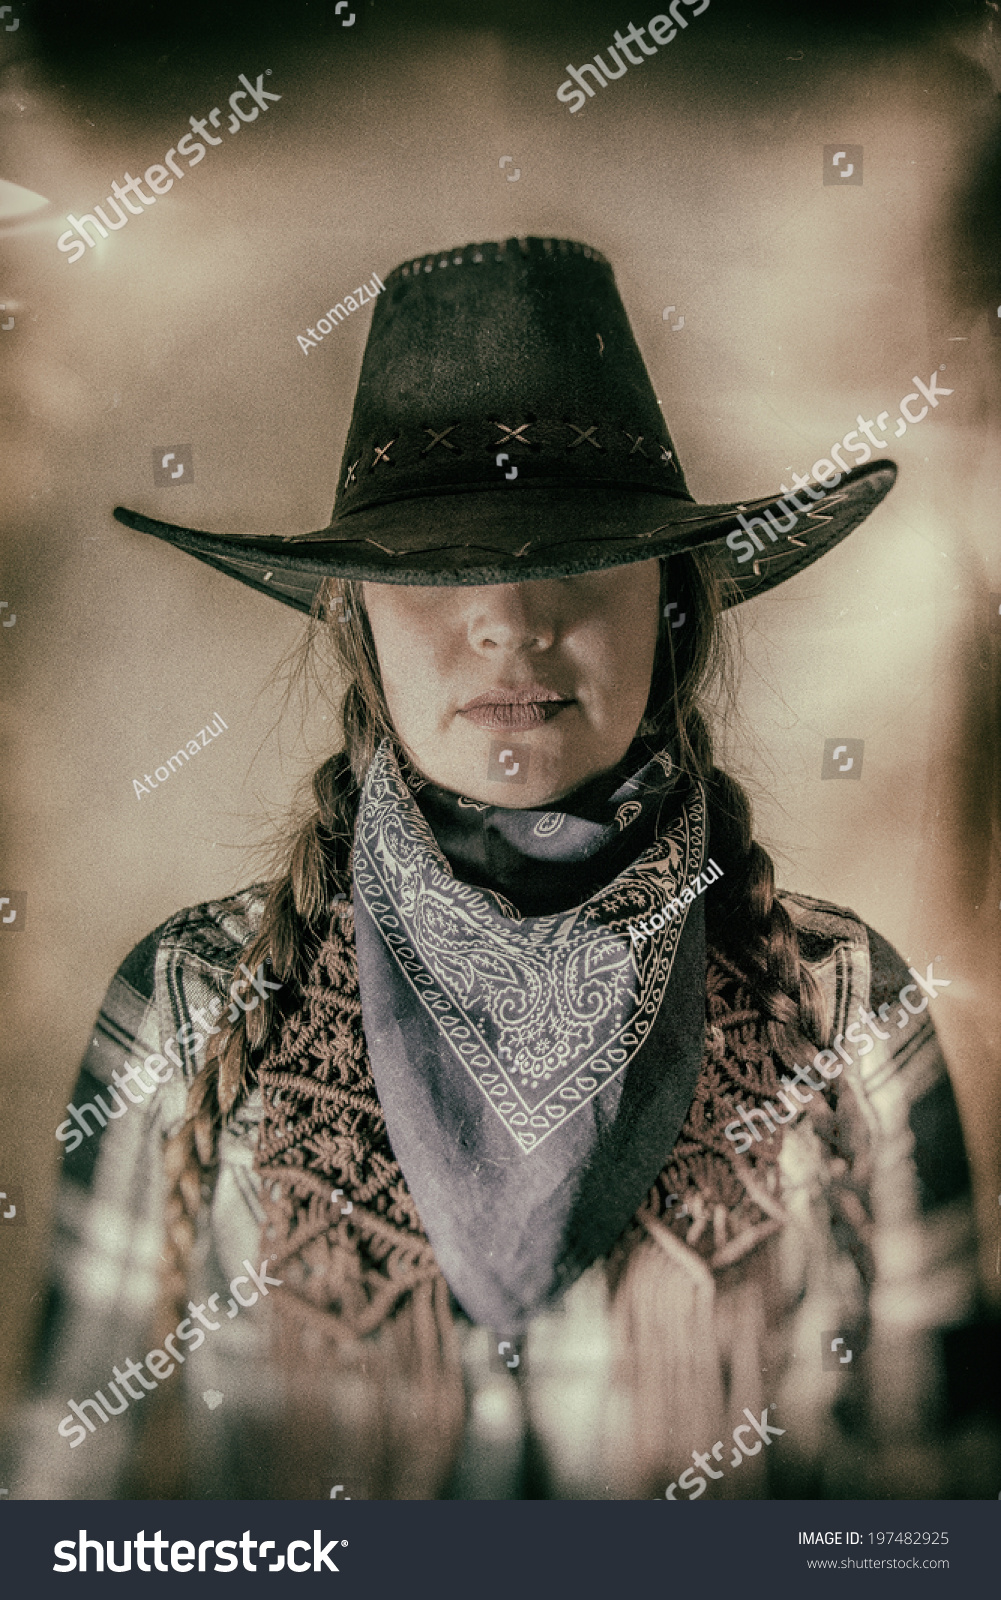 Old West Cowgirl Hat Low Wide. Old west cowgirl with hat low blocking eyes, edited in vintage film style. #197482925